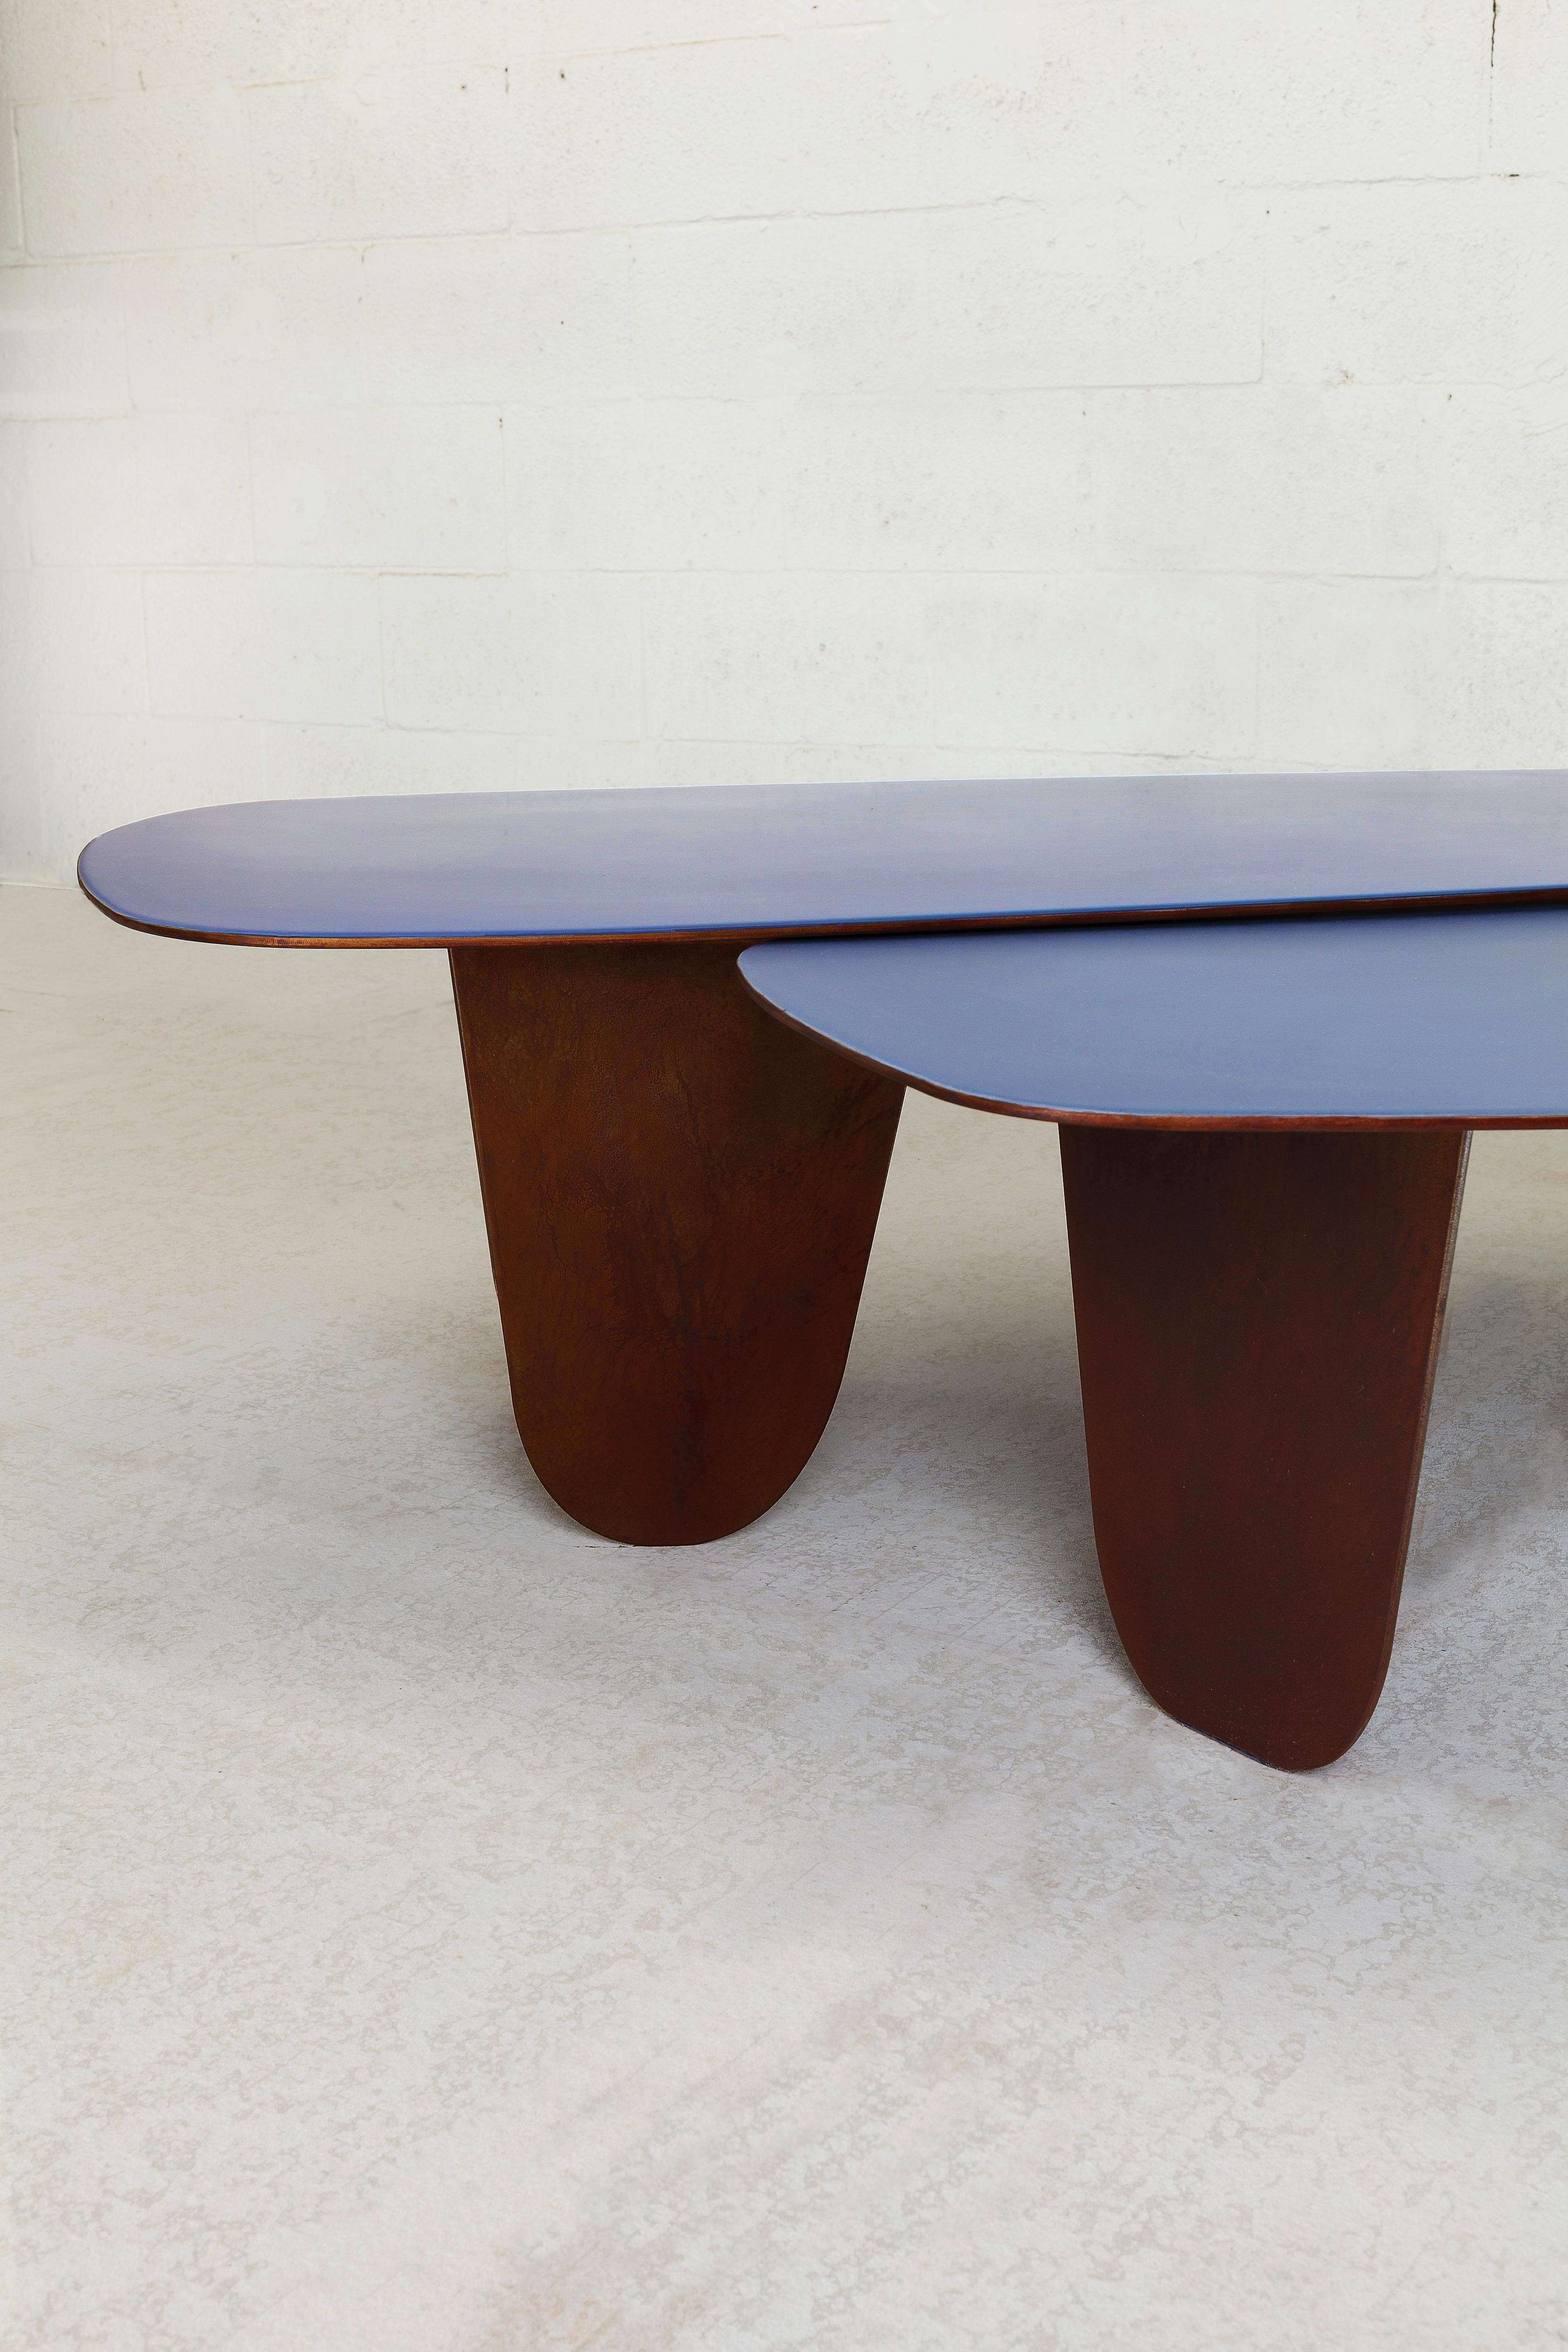 Contemporary Organic Minimalist Steel and Resin Low Tables by Vivian Carbonell For Sale 2